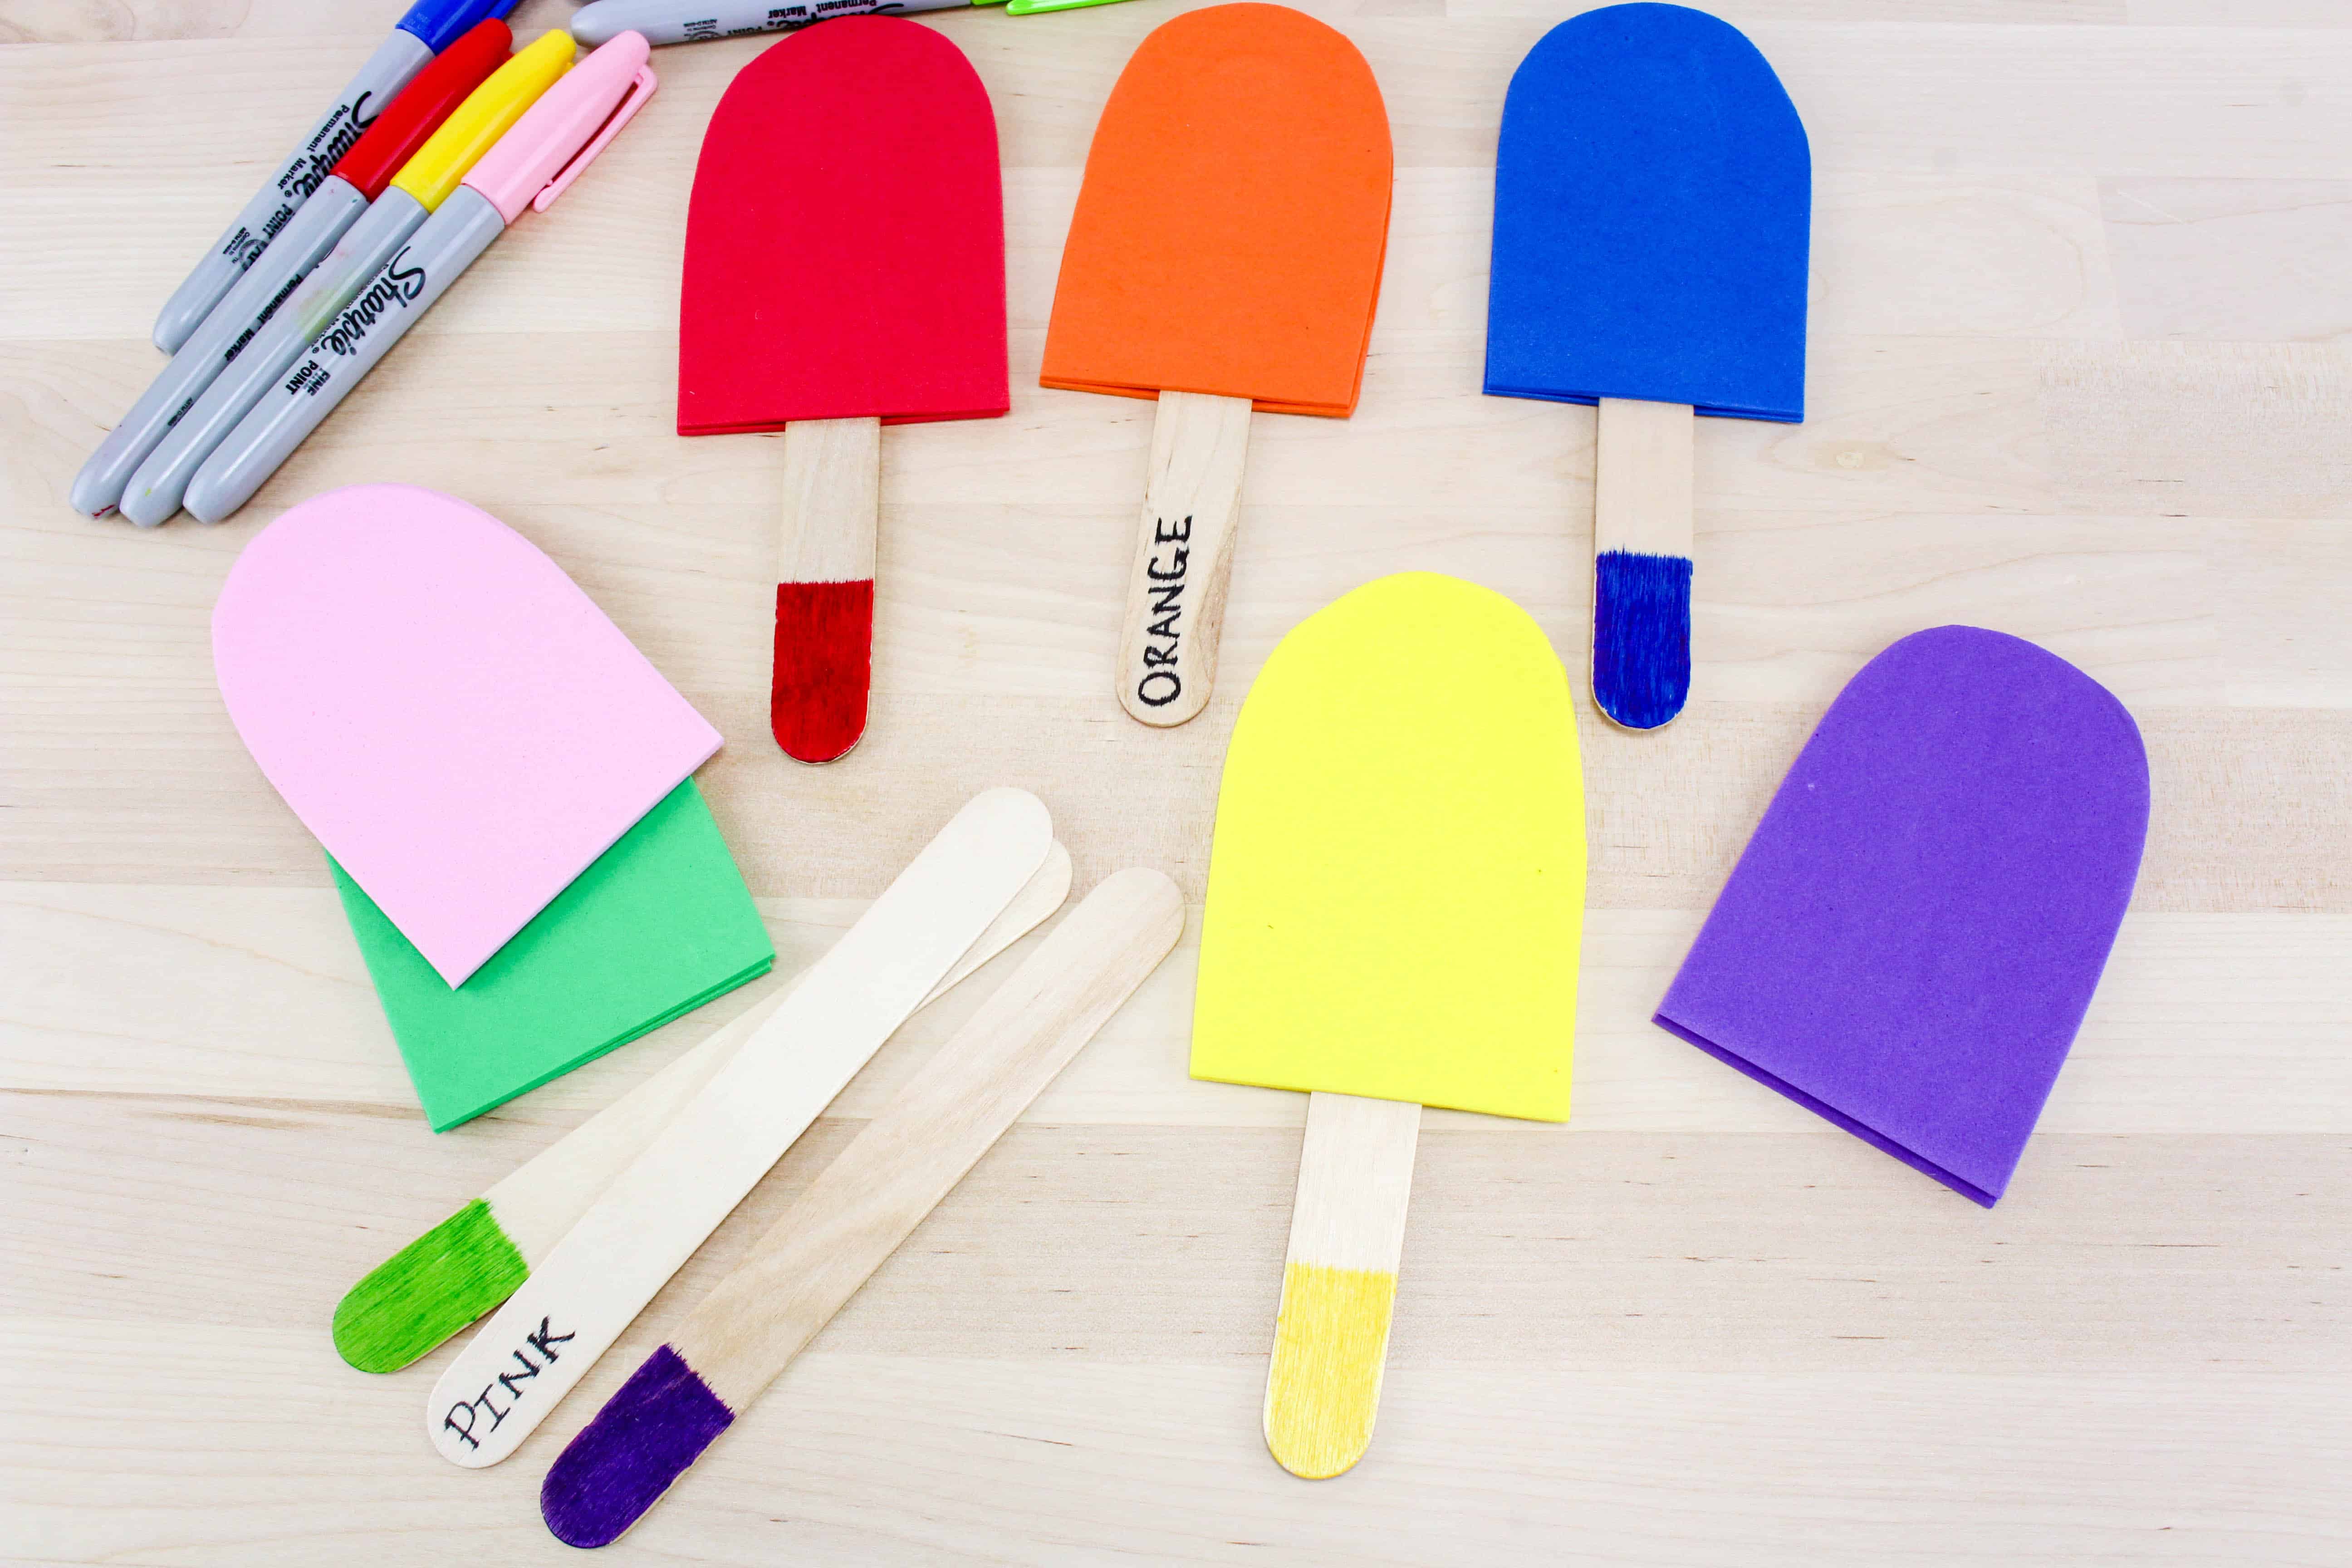 It is the time to learn about colors in the hotter temperature. Today I would like to share Color Matching Popsicles Craft to help kids learning more colors